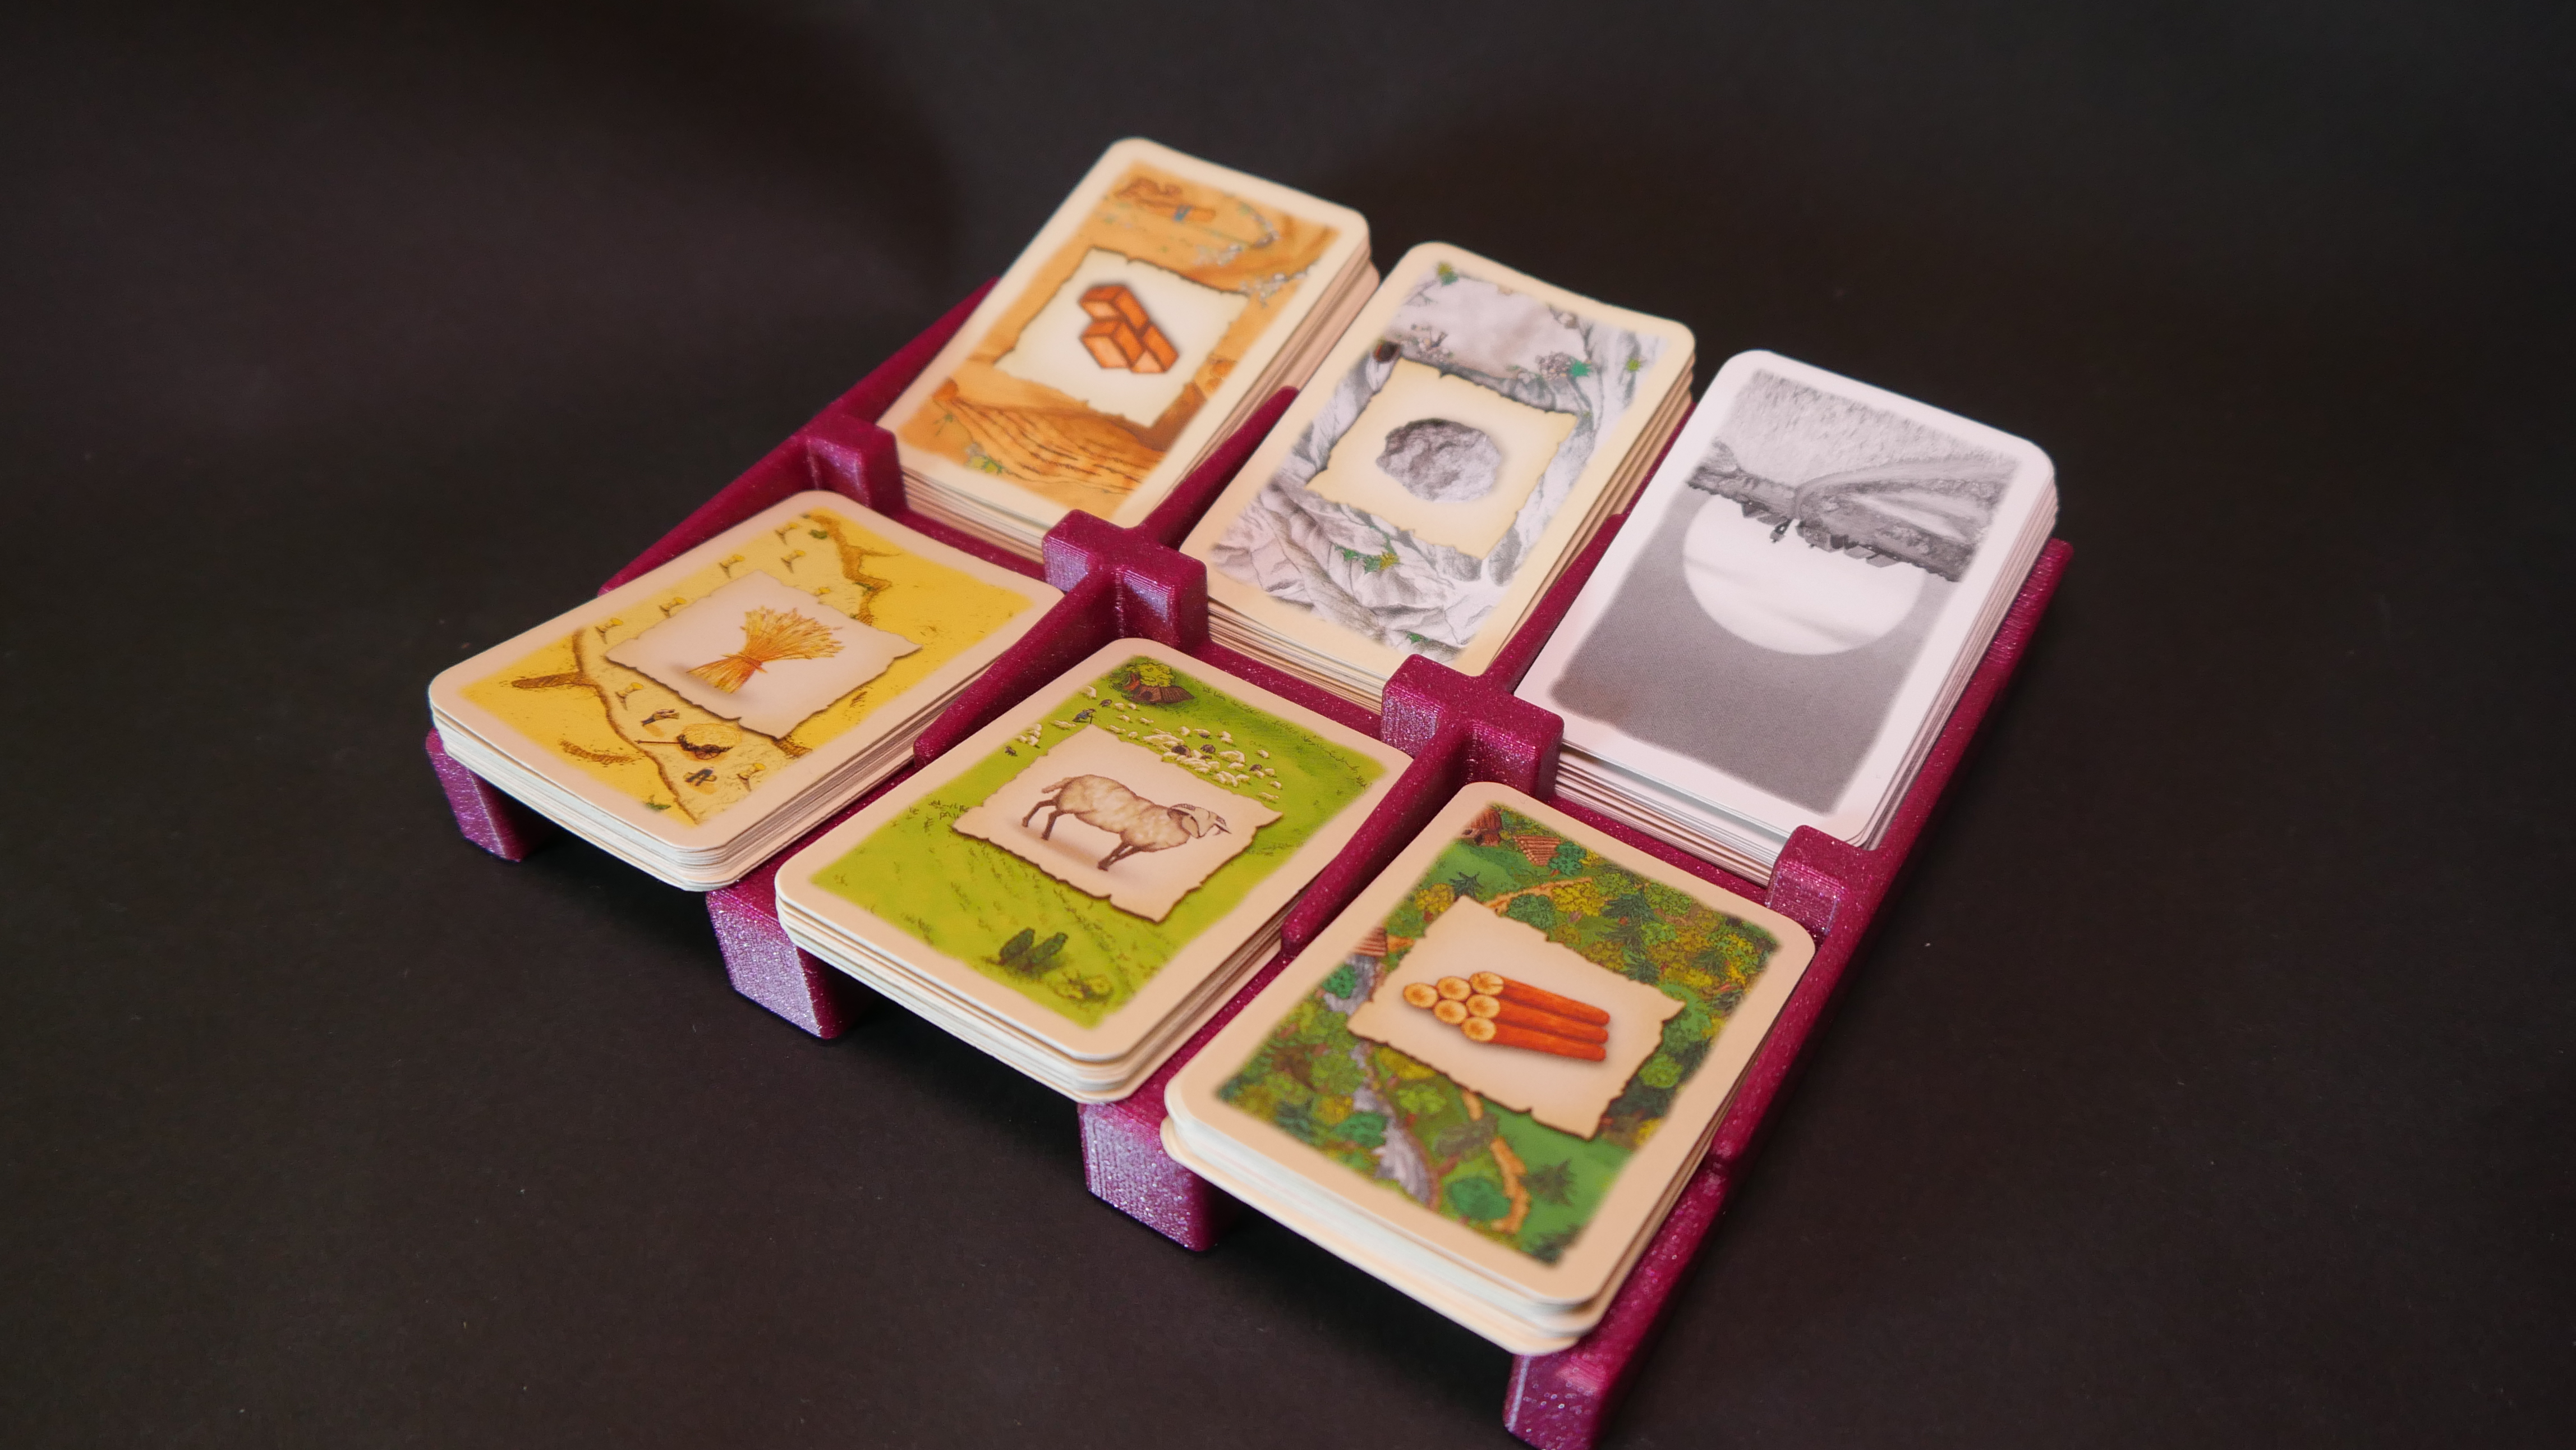 Settlers of Catan resource card holder/tray